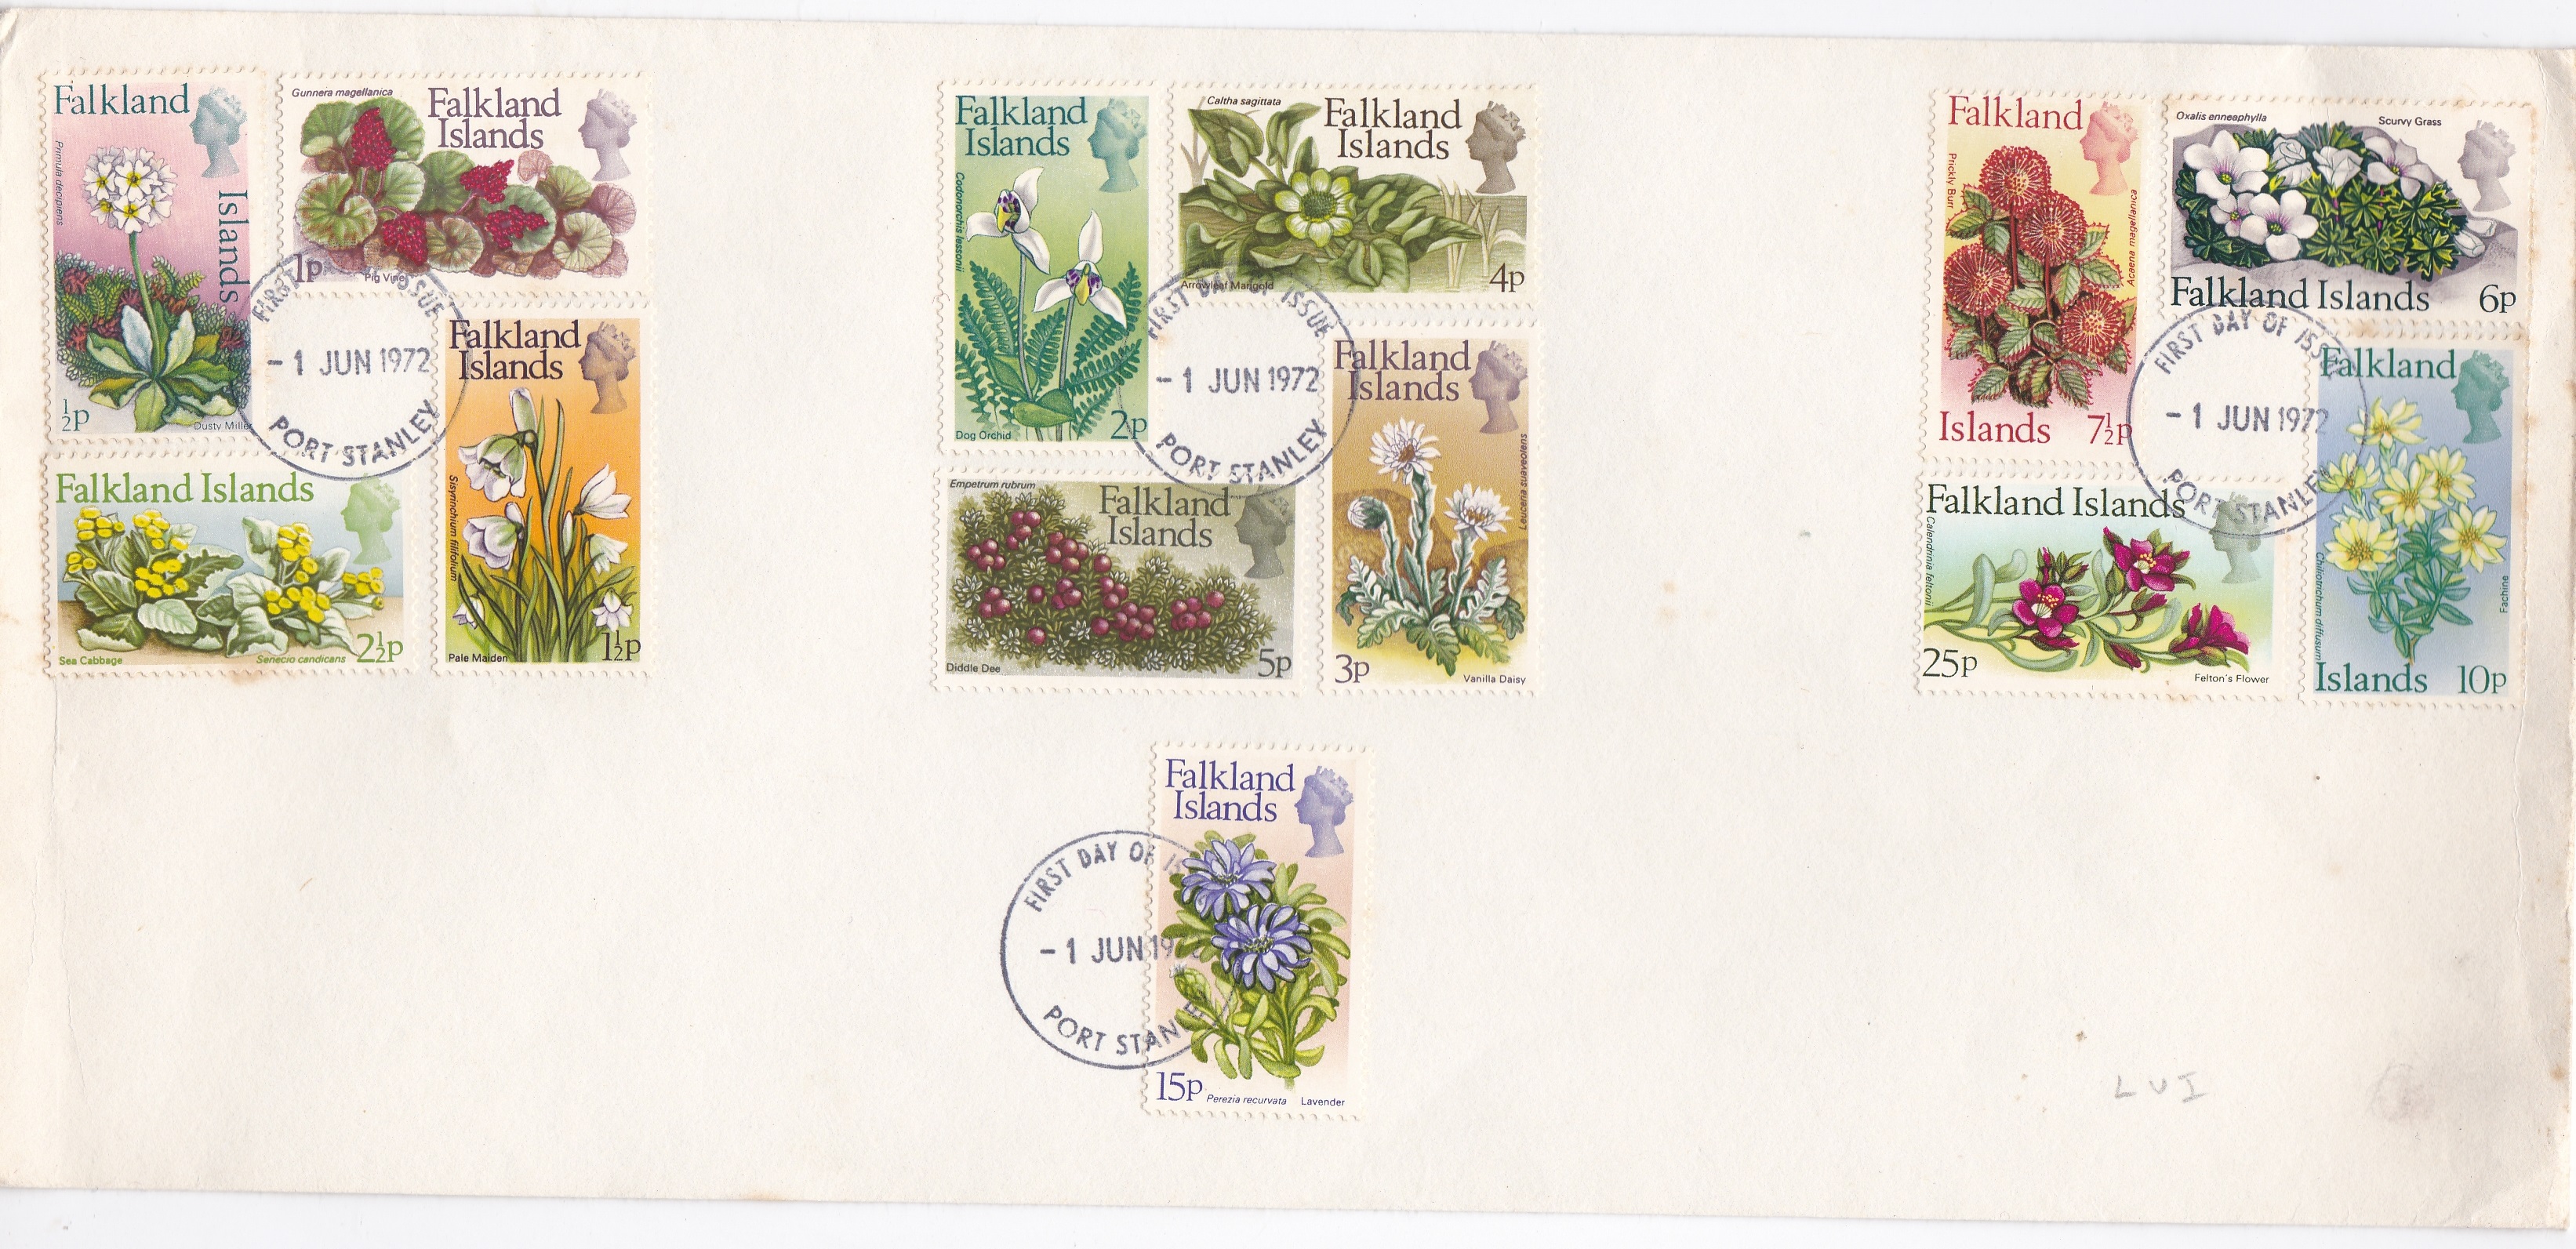 Falkland Islands 1972 Decimal flowers issue unaddressed envelope cancelled 1st day of issue 1/6/1972